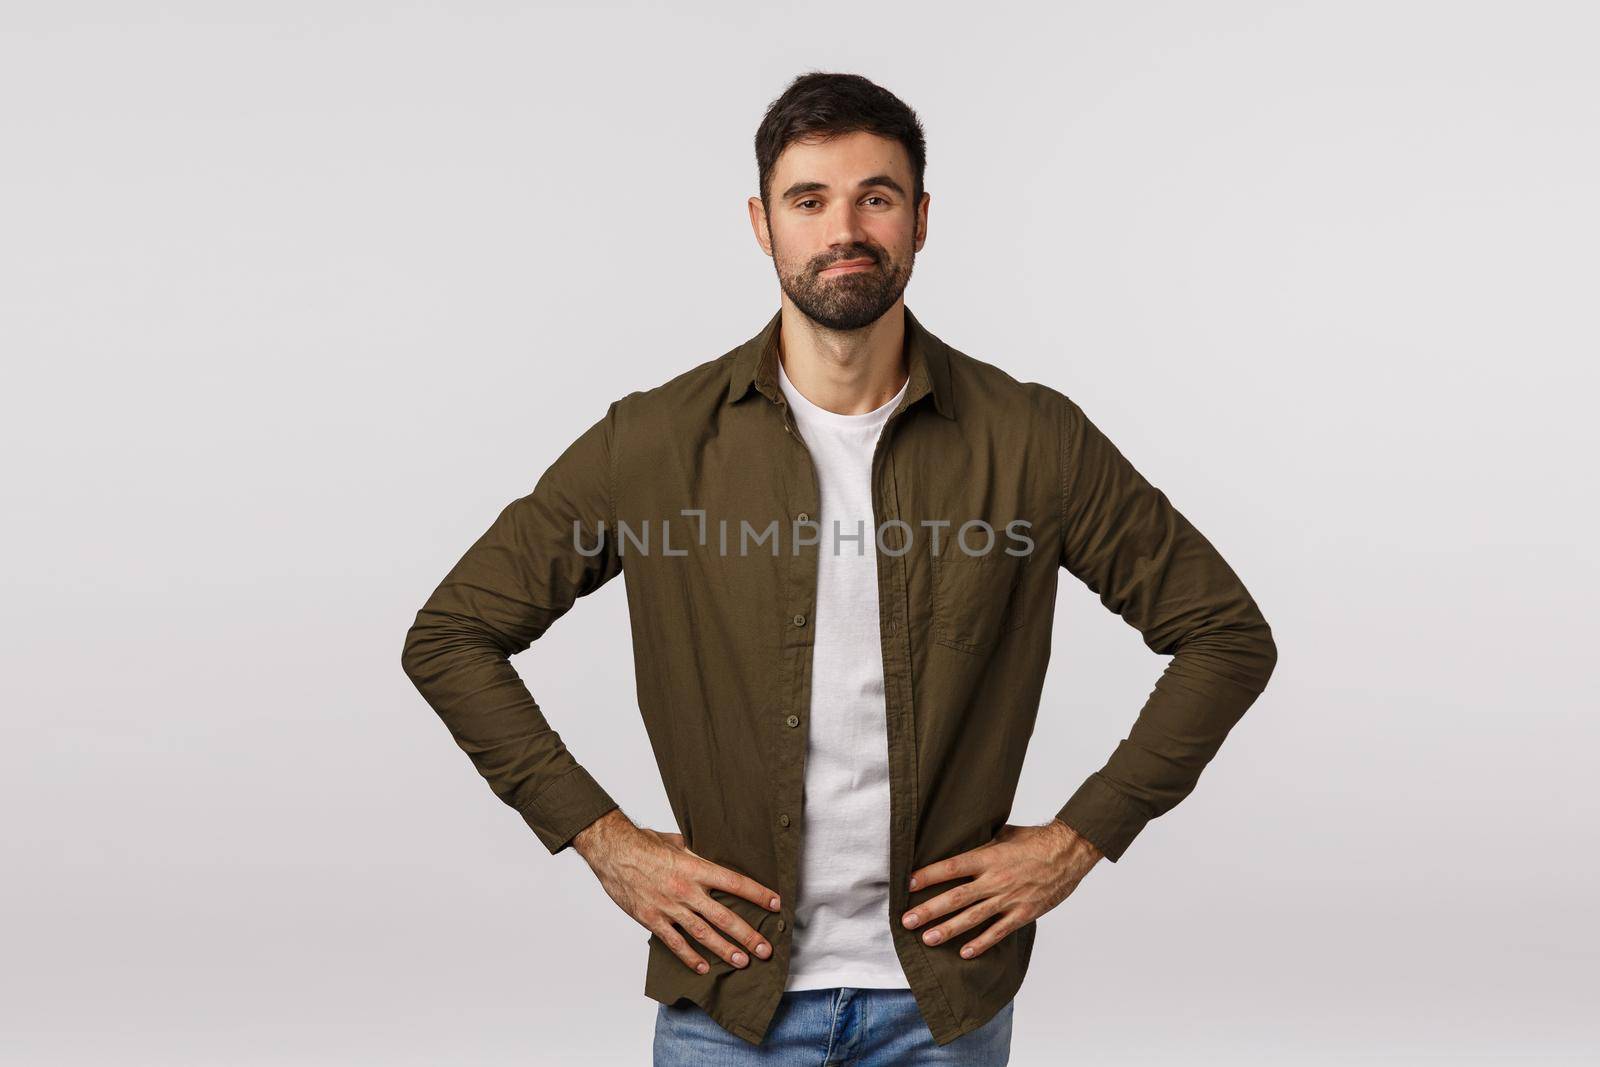 Proud and confident, motivated lucky businessman manage great business, hold hands on hips and smiling satisfied, revise good result, feeling pleased, standing white background joyful.